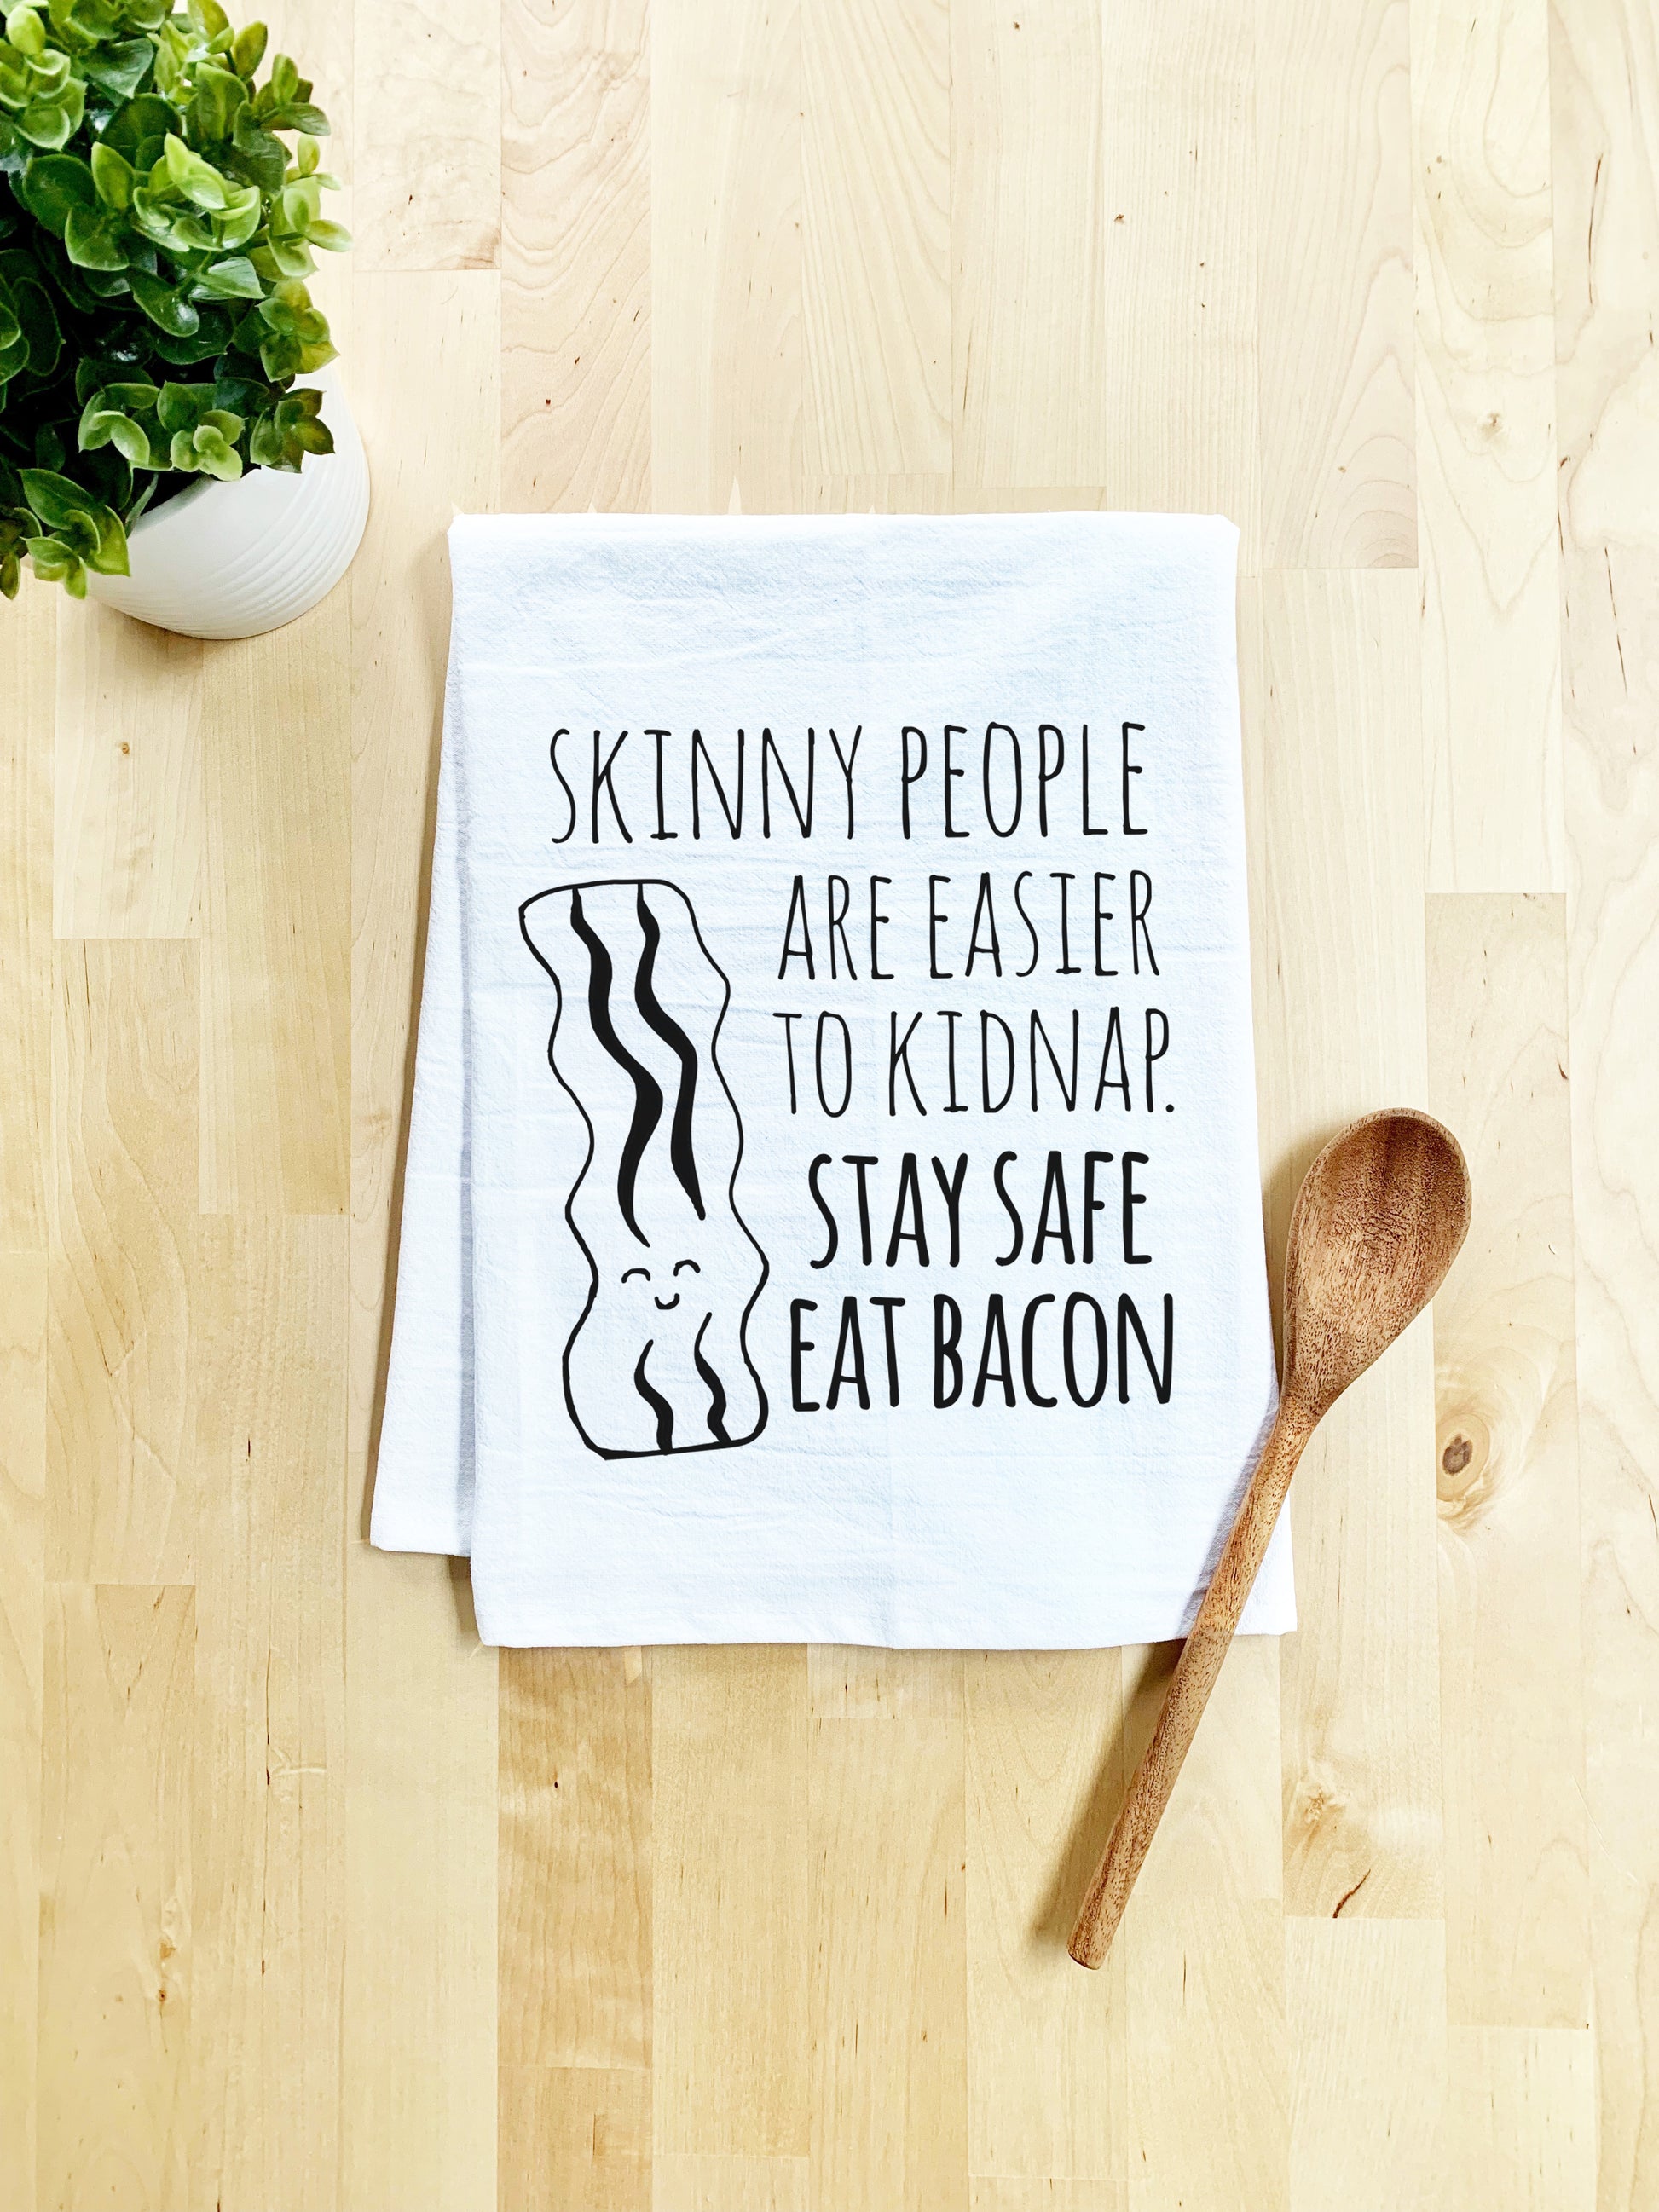 Skinny People Are Easier To Kidnap Stay Safe Eat Bacon Dish Towel - White Or Gray - MoonlightMakers